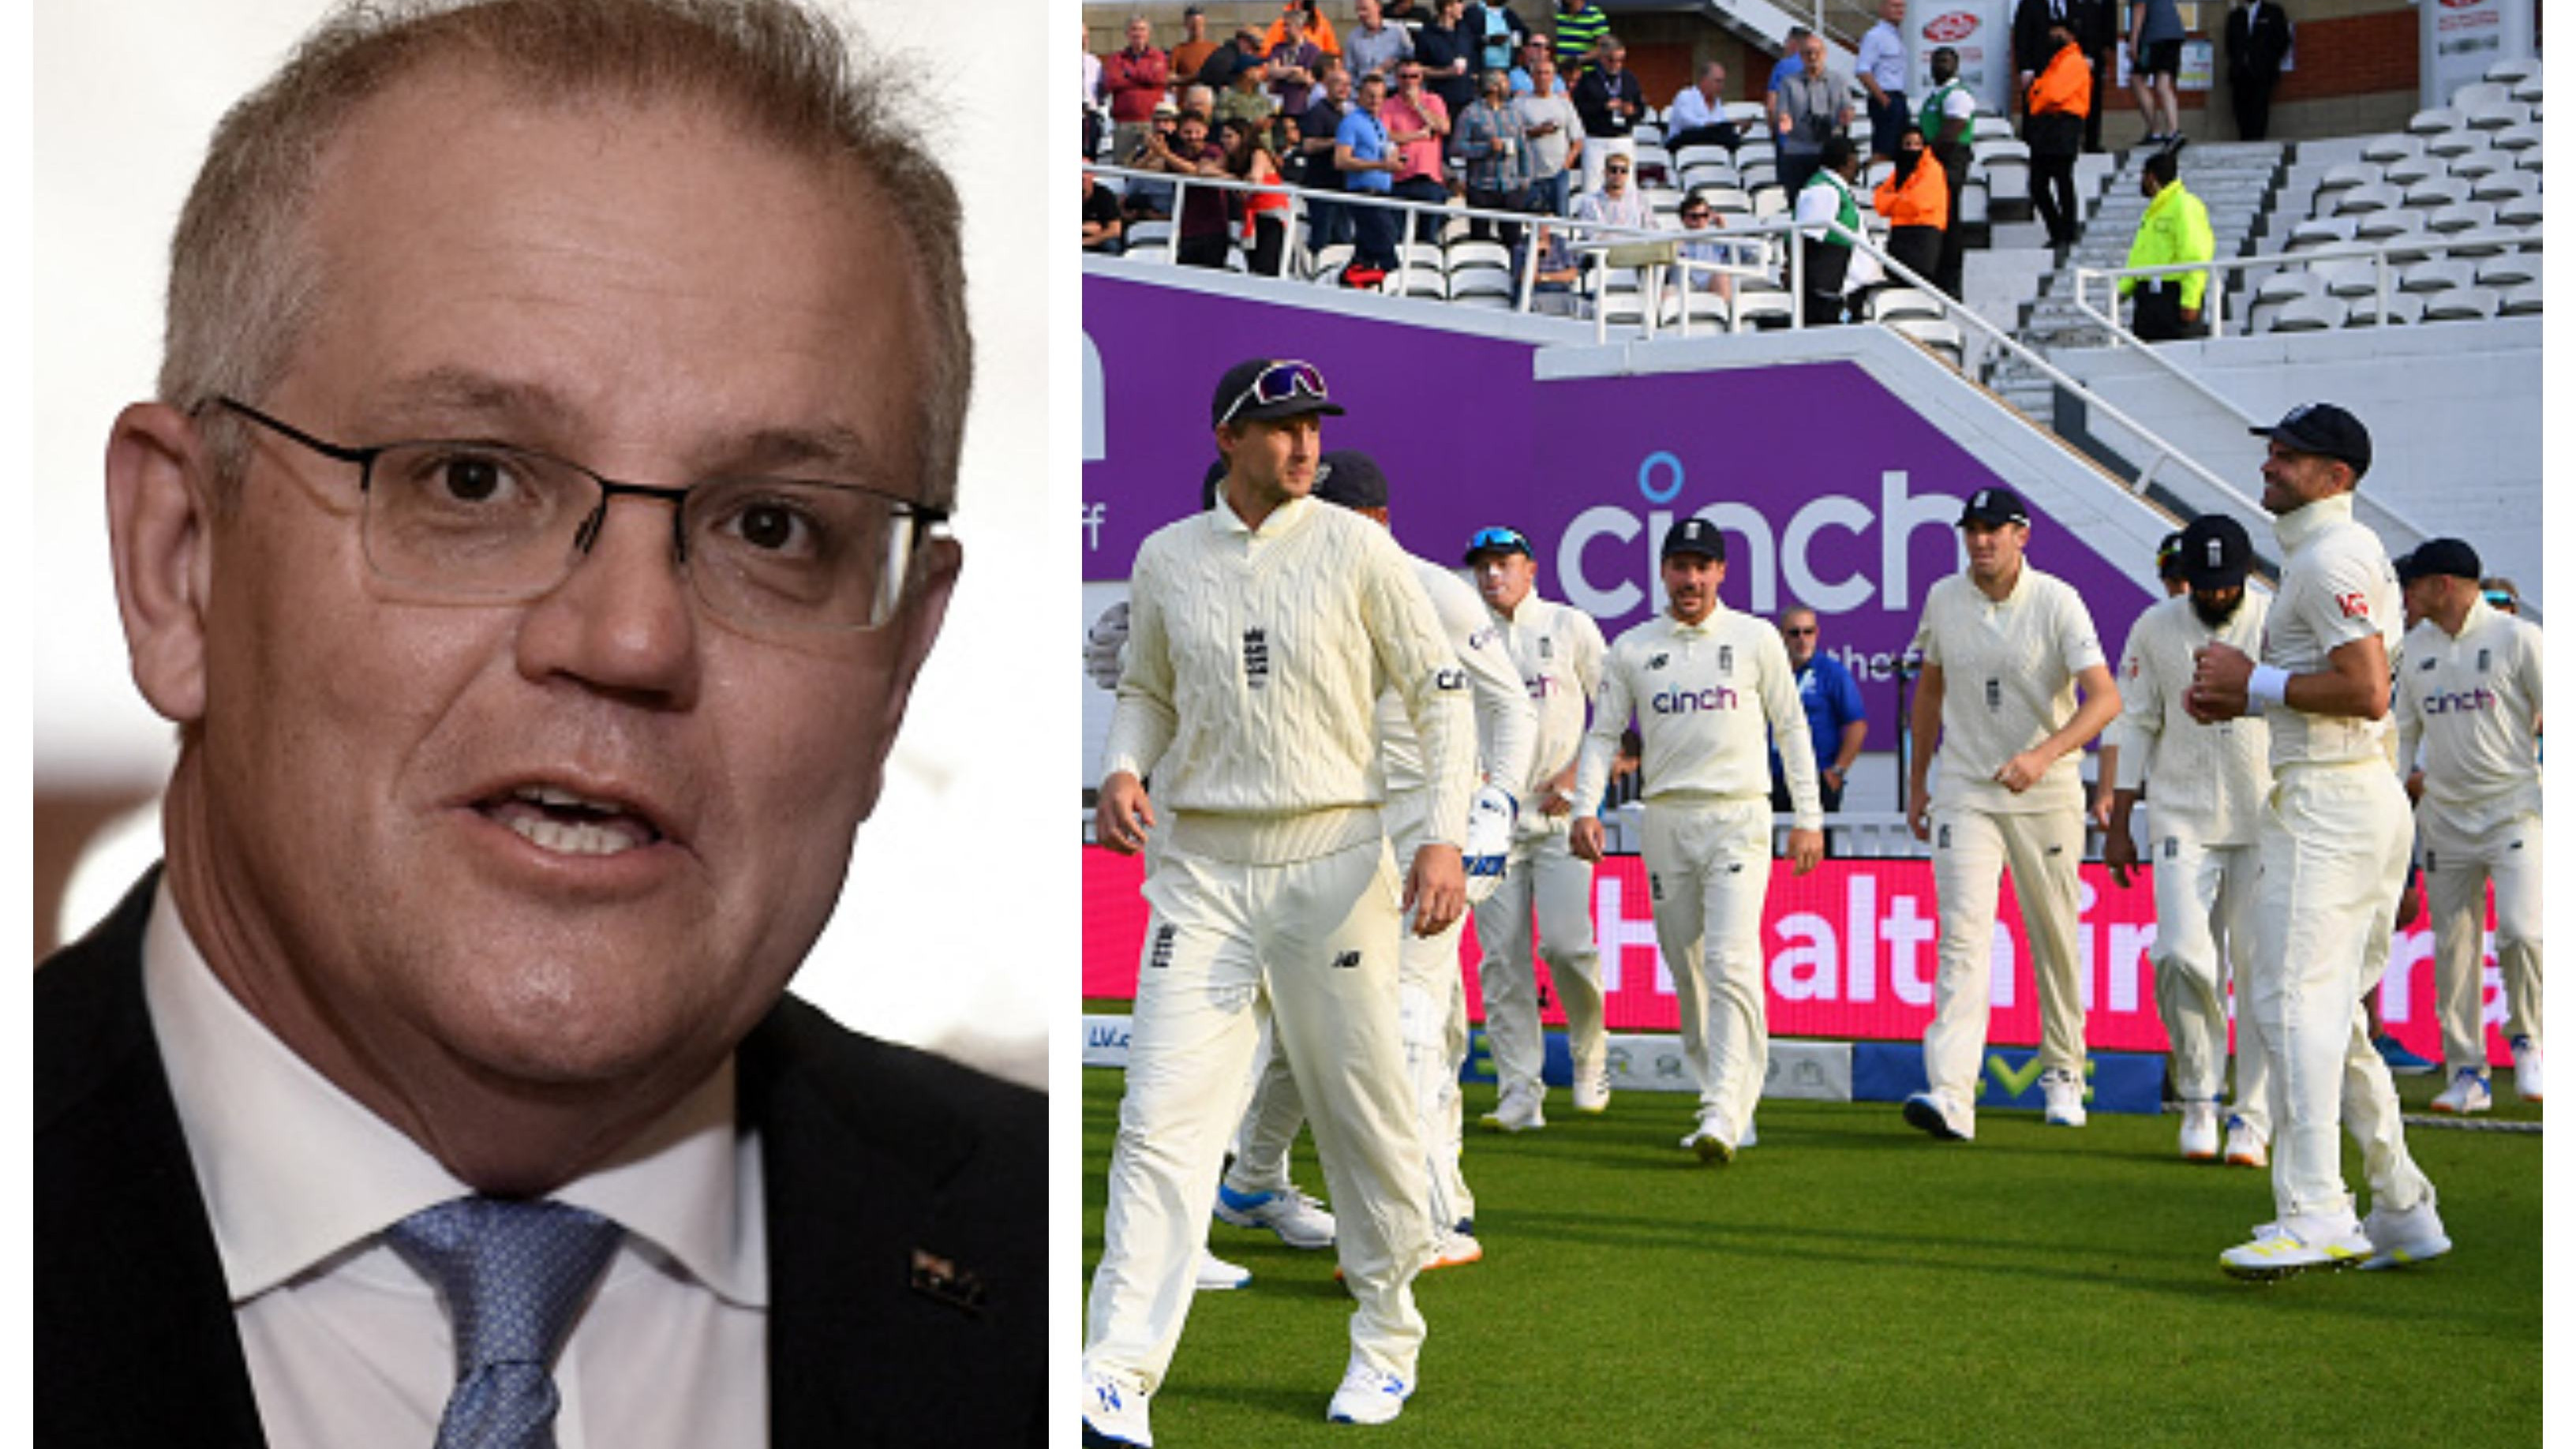 Australian Prime Minister declares “no special deals” for England cricketers during Ashes 2021-22